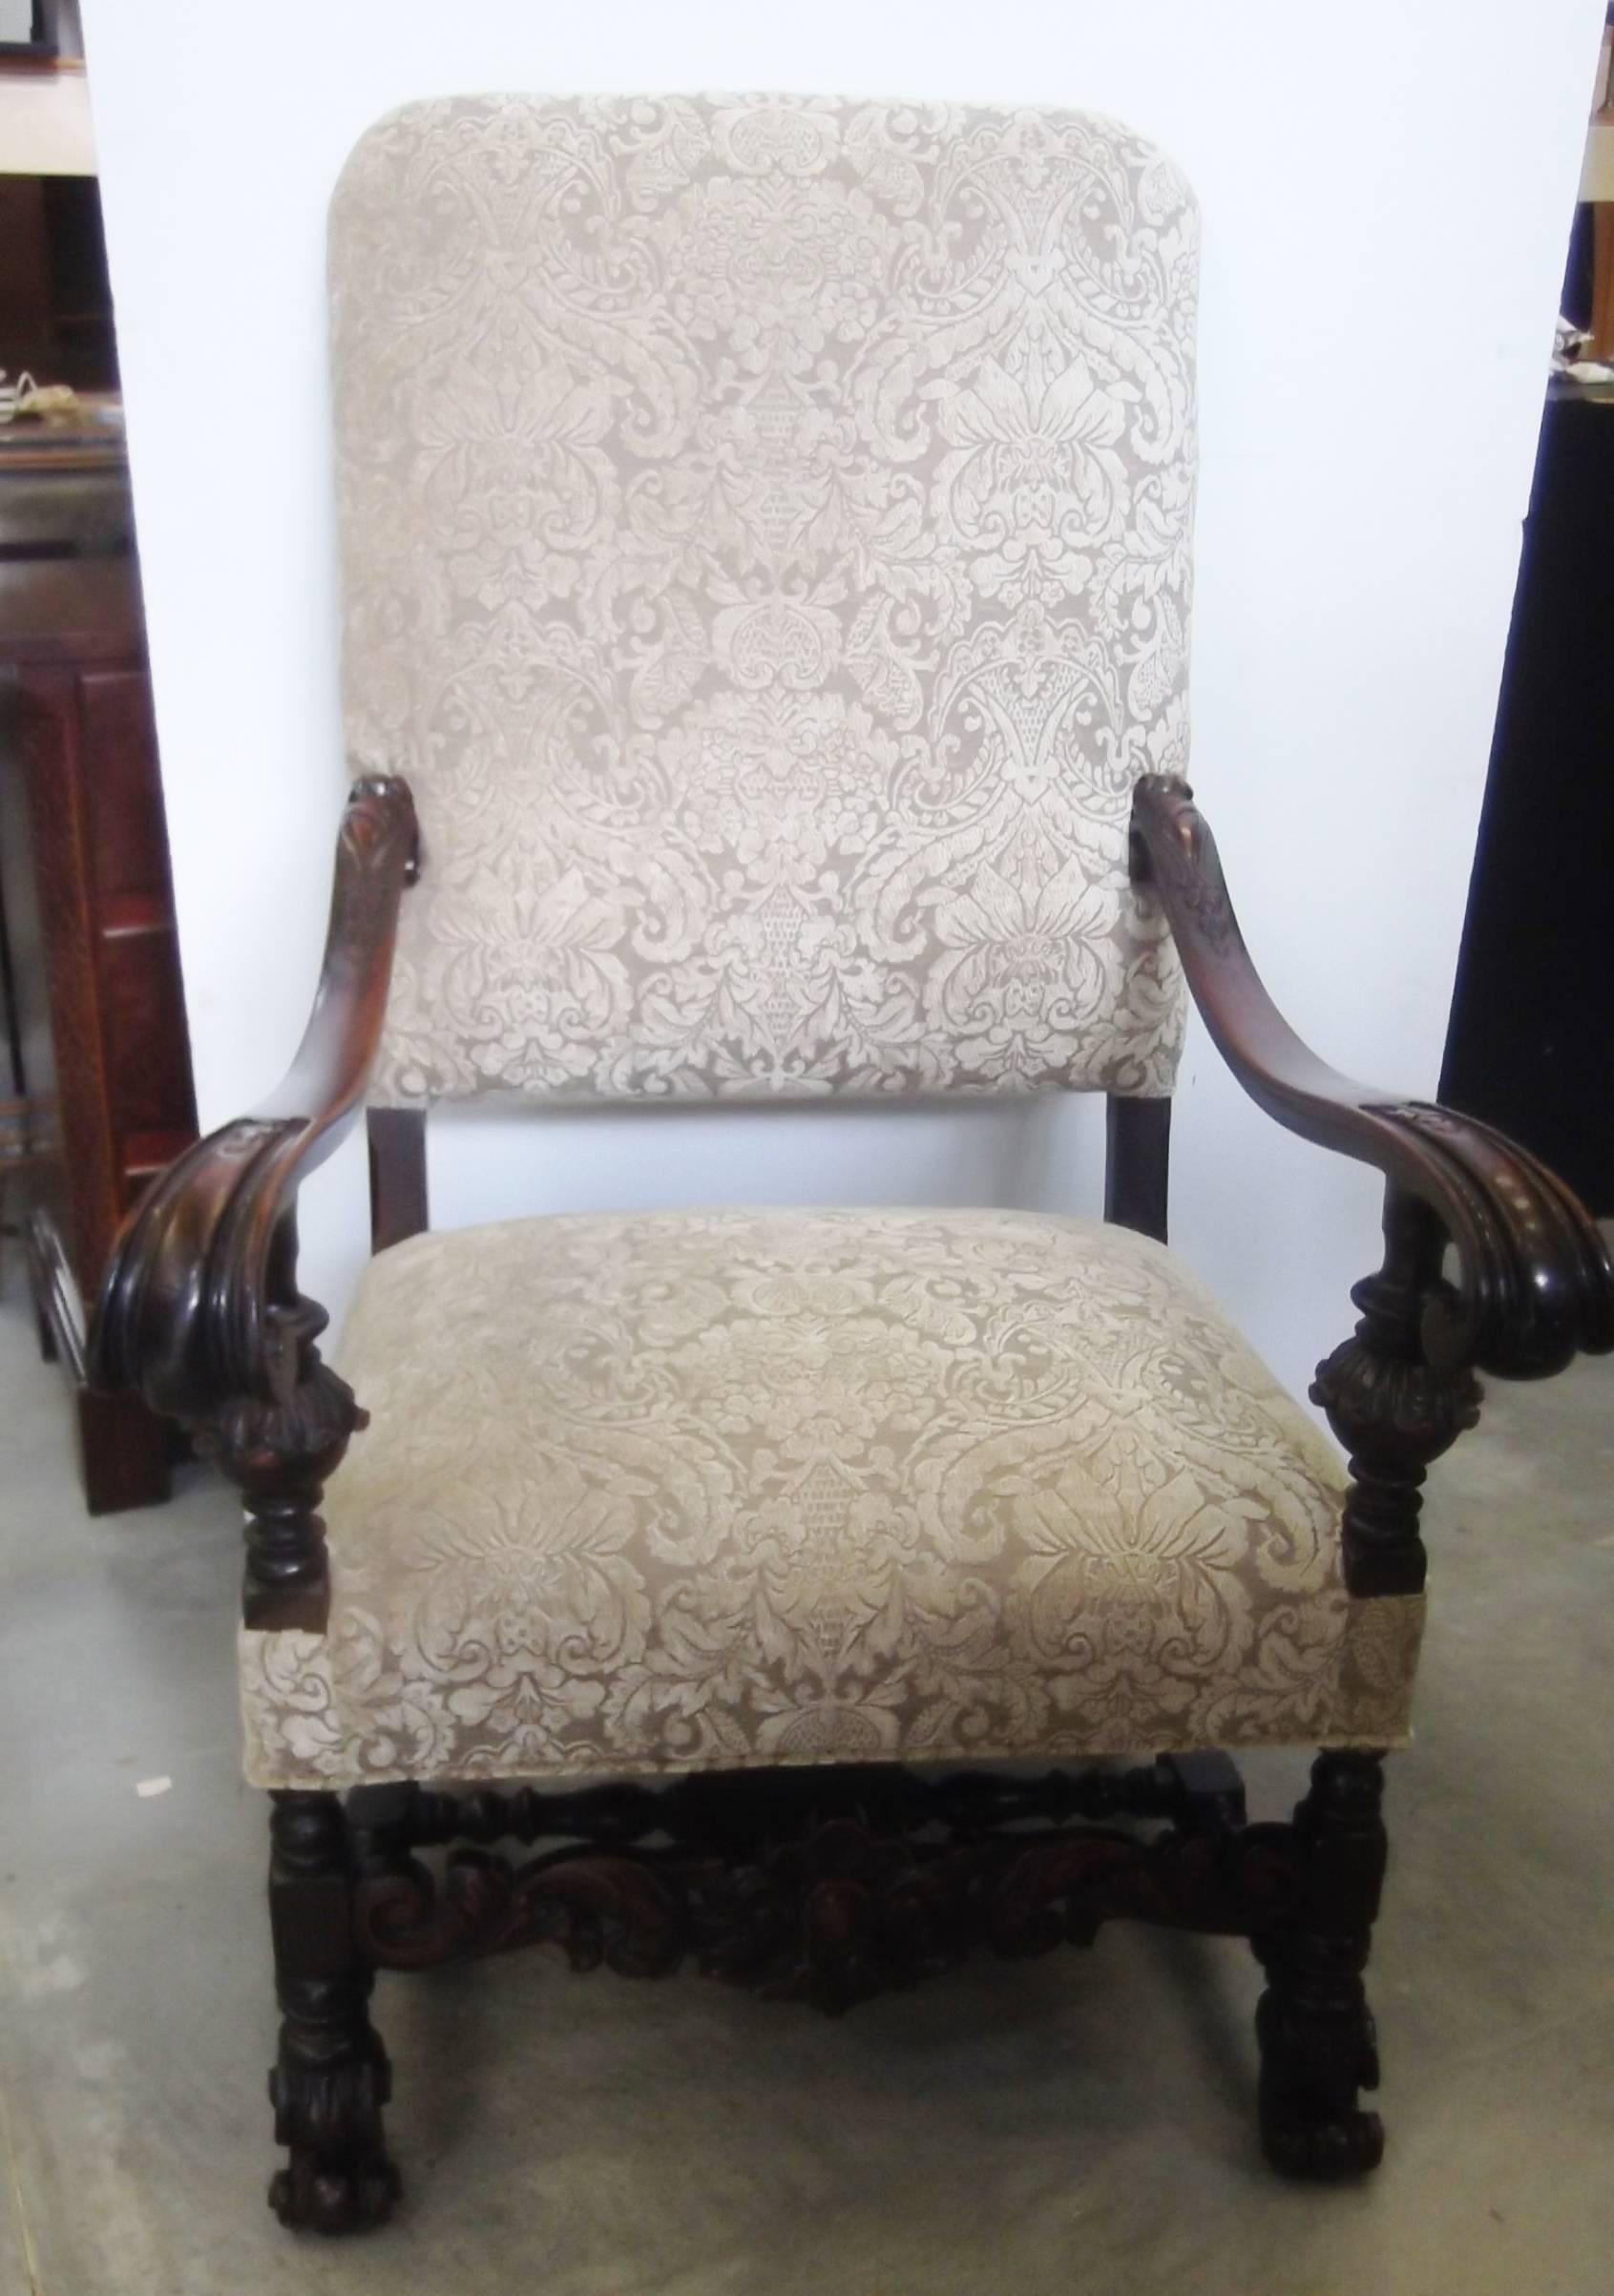 Impressive and stately English throne armchair with shapely scrolled arms. The detailed frame is hand carved and has a nice patination to the wood from decades of well cared for use. The new fabric is a damask chenille in a neutral mushroom color.